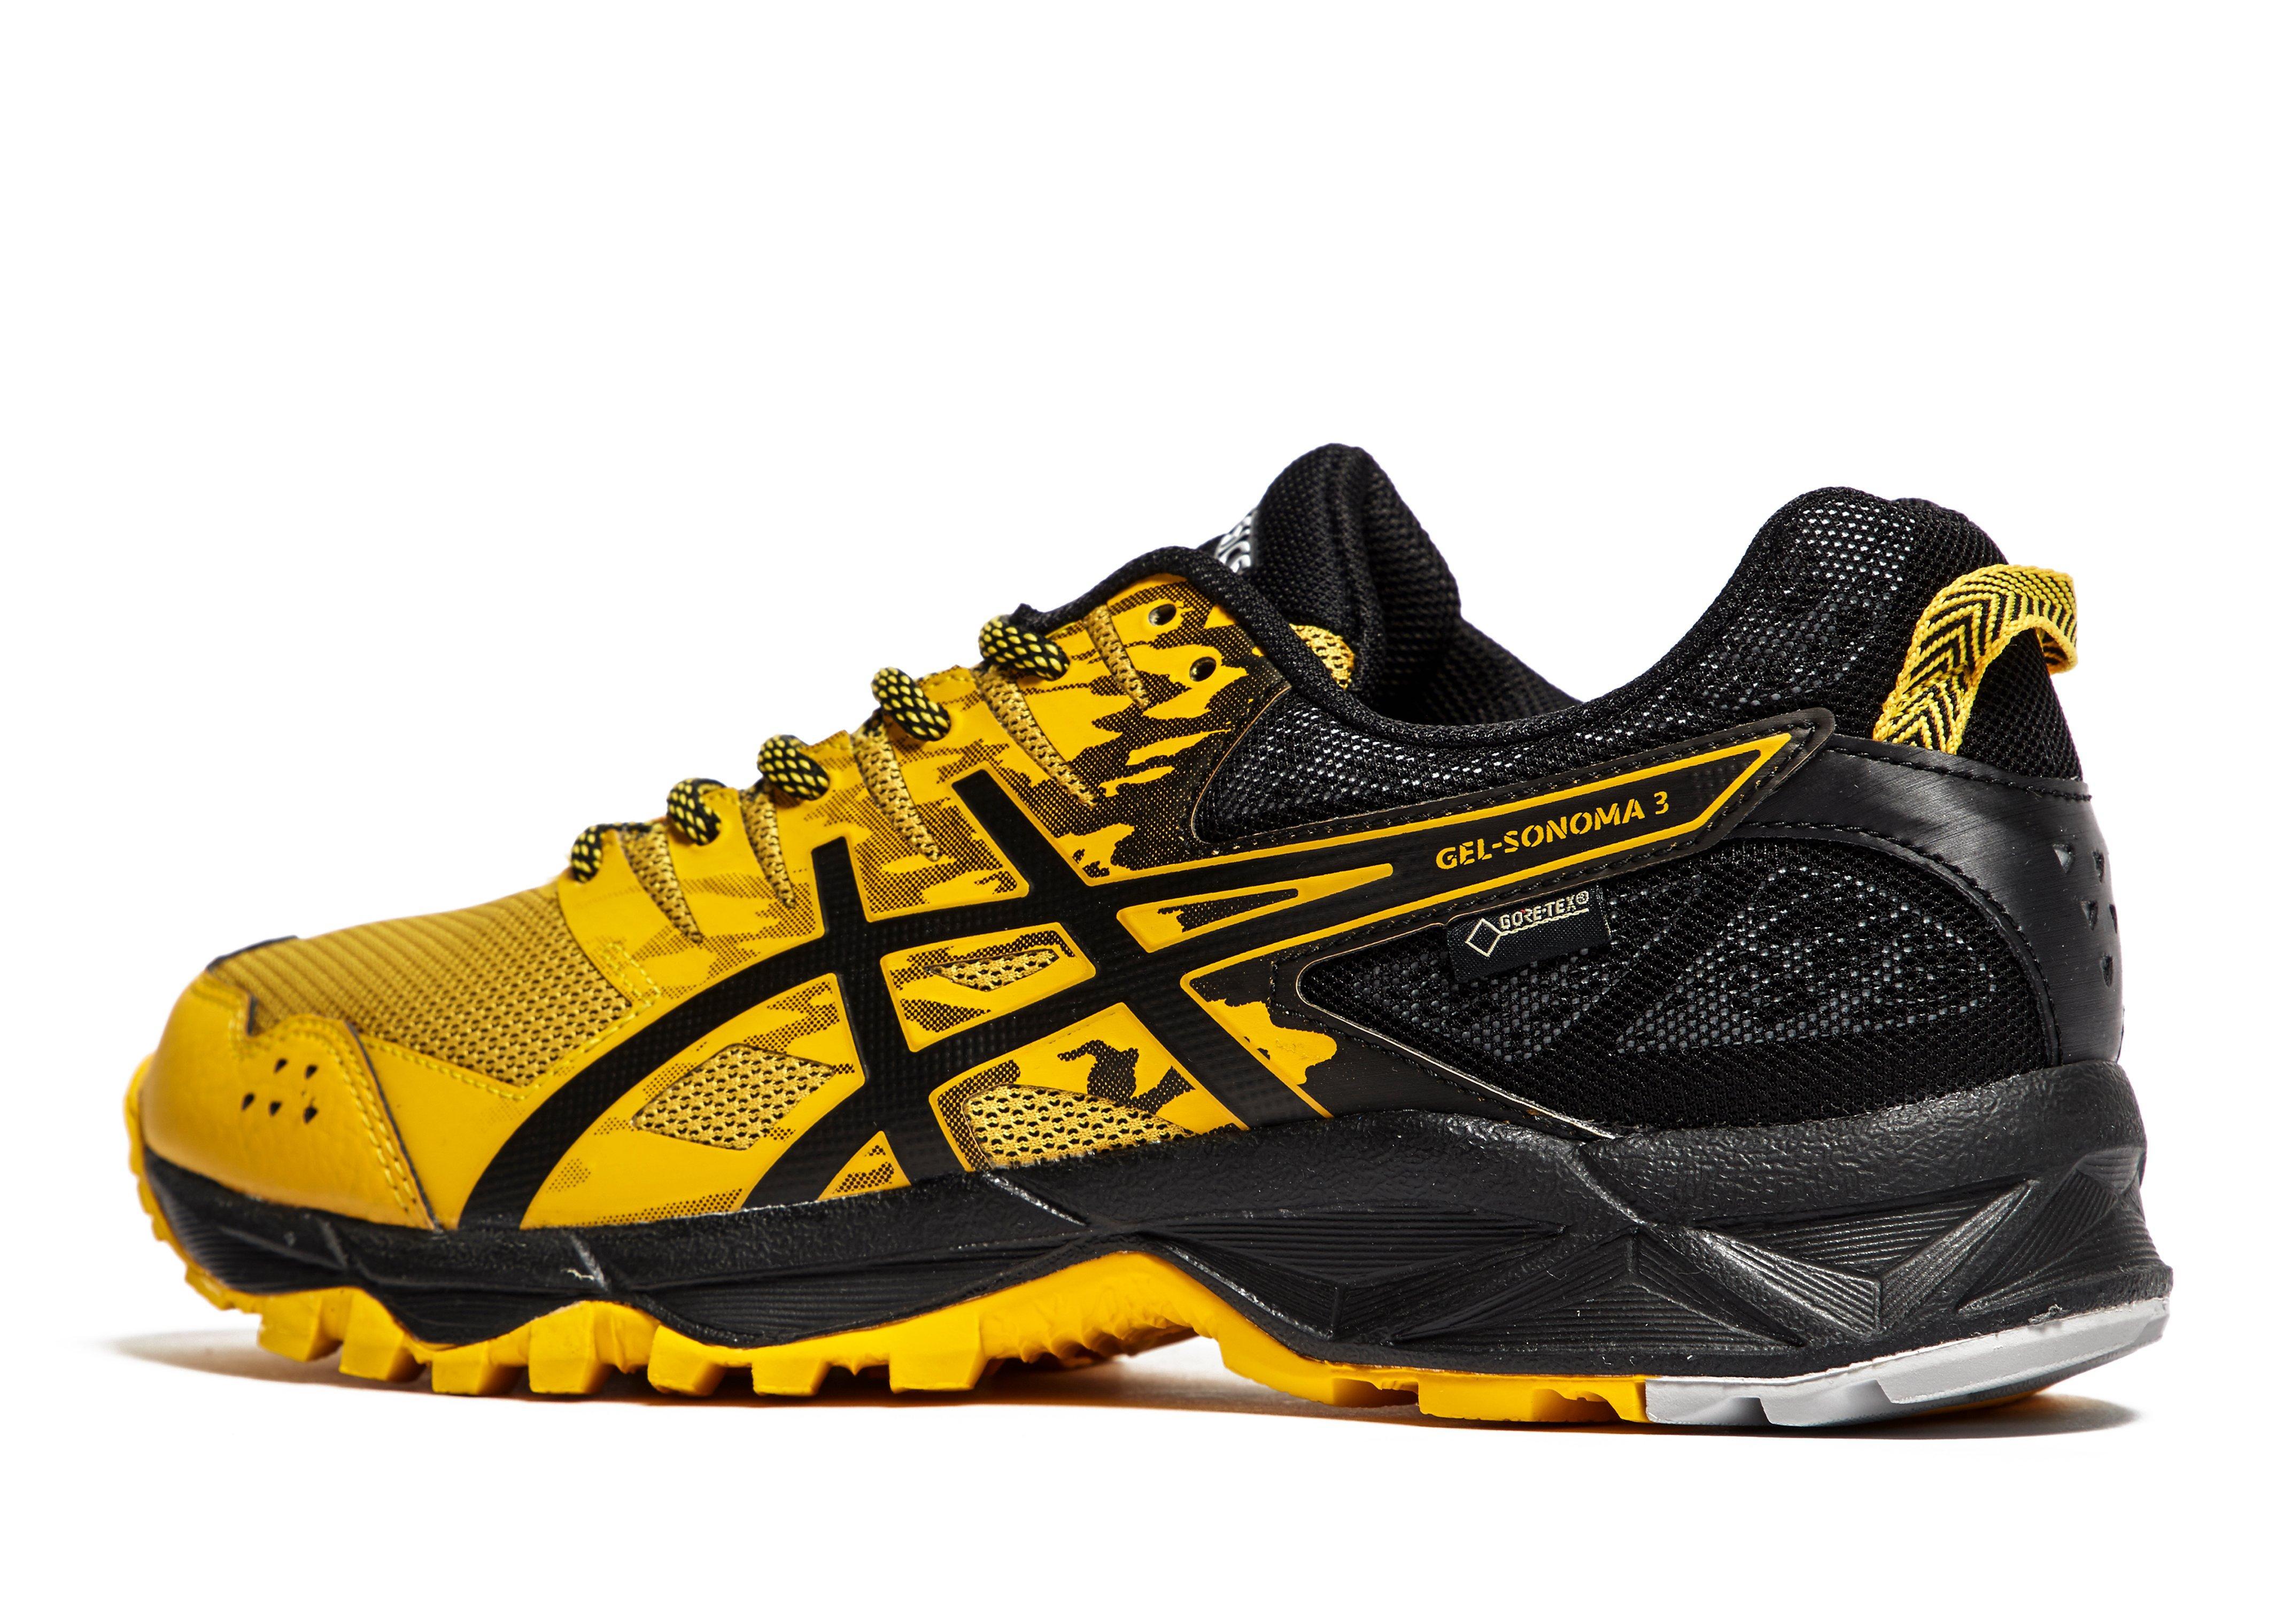 Lyst Asics Gel Sonoma 3 Running Shoes In Yellow For Men